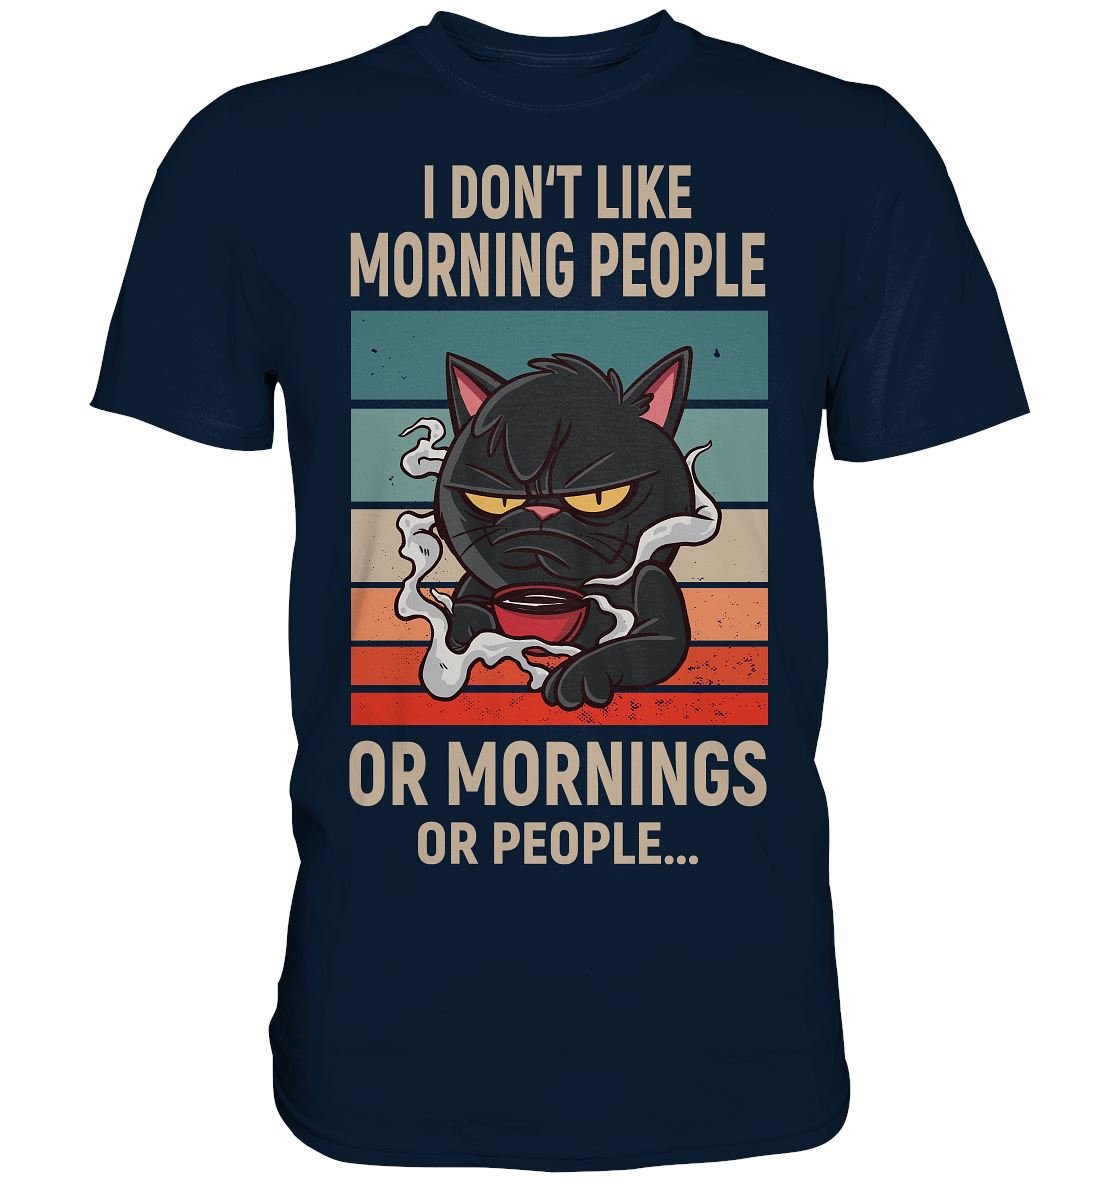 I Hate Morning People And Mornings And People - Premium Shirt - BINYA